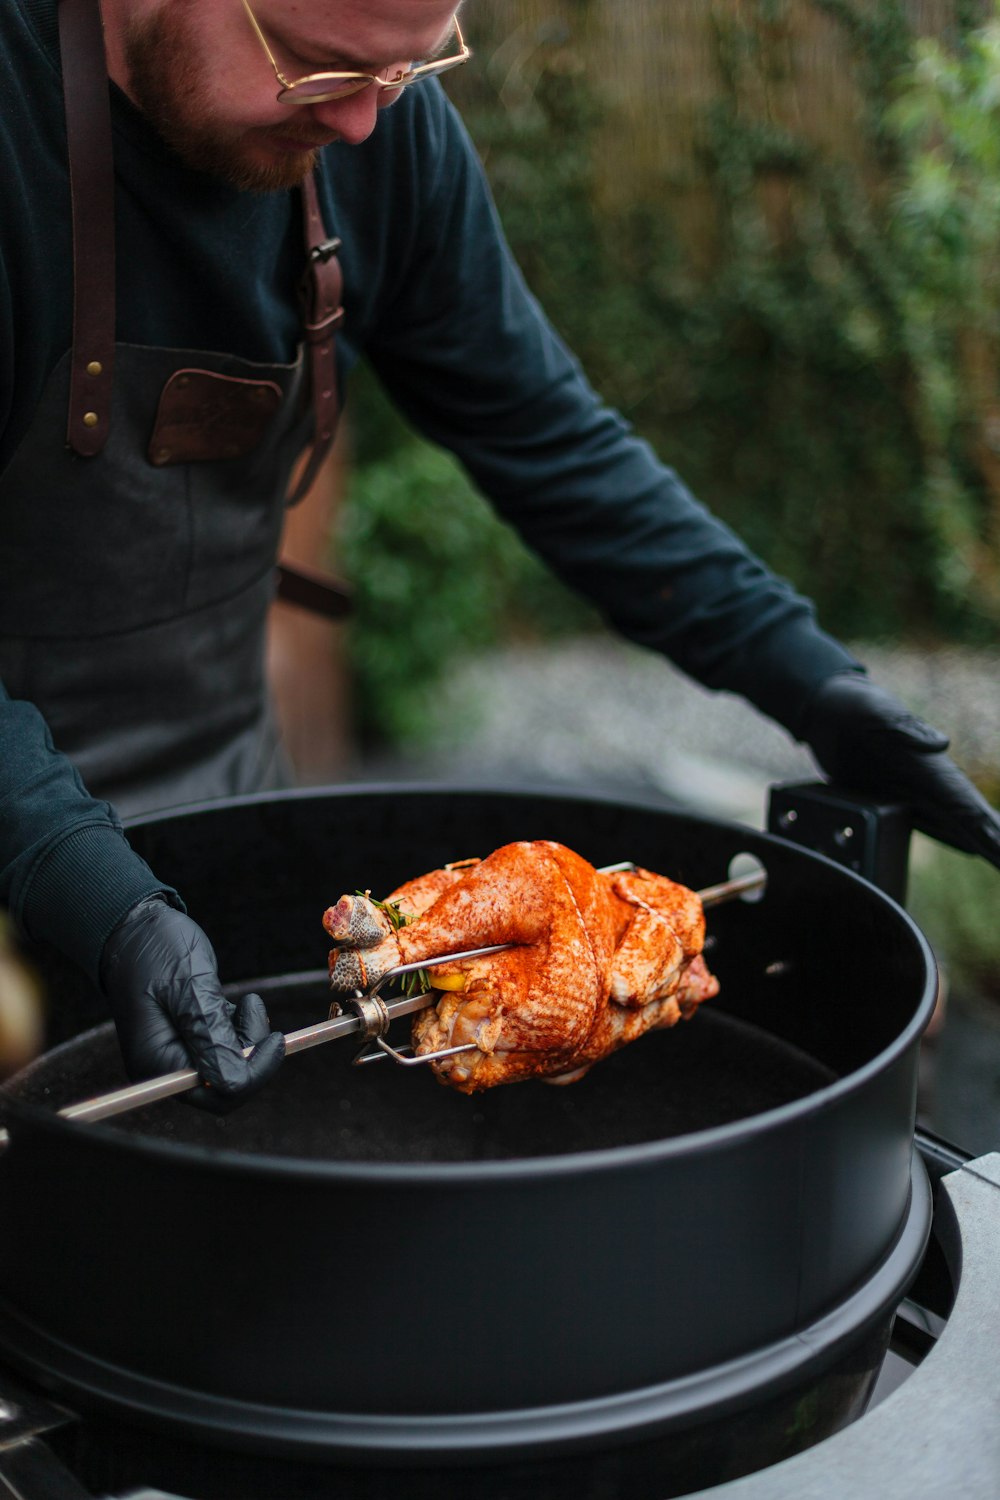 person in black jacket holding grilled meat on black charcoal grill during daytime